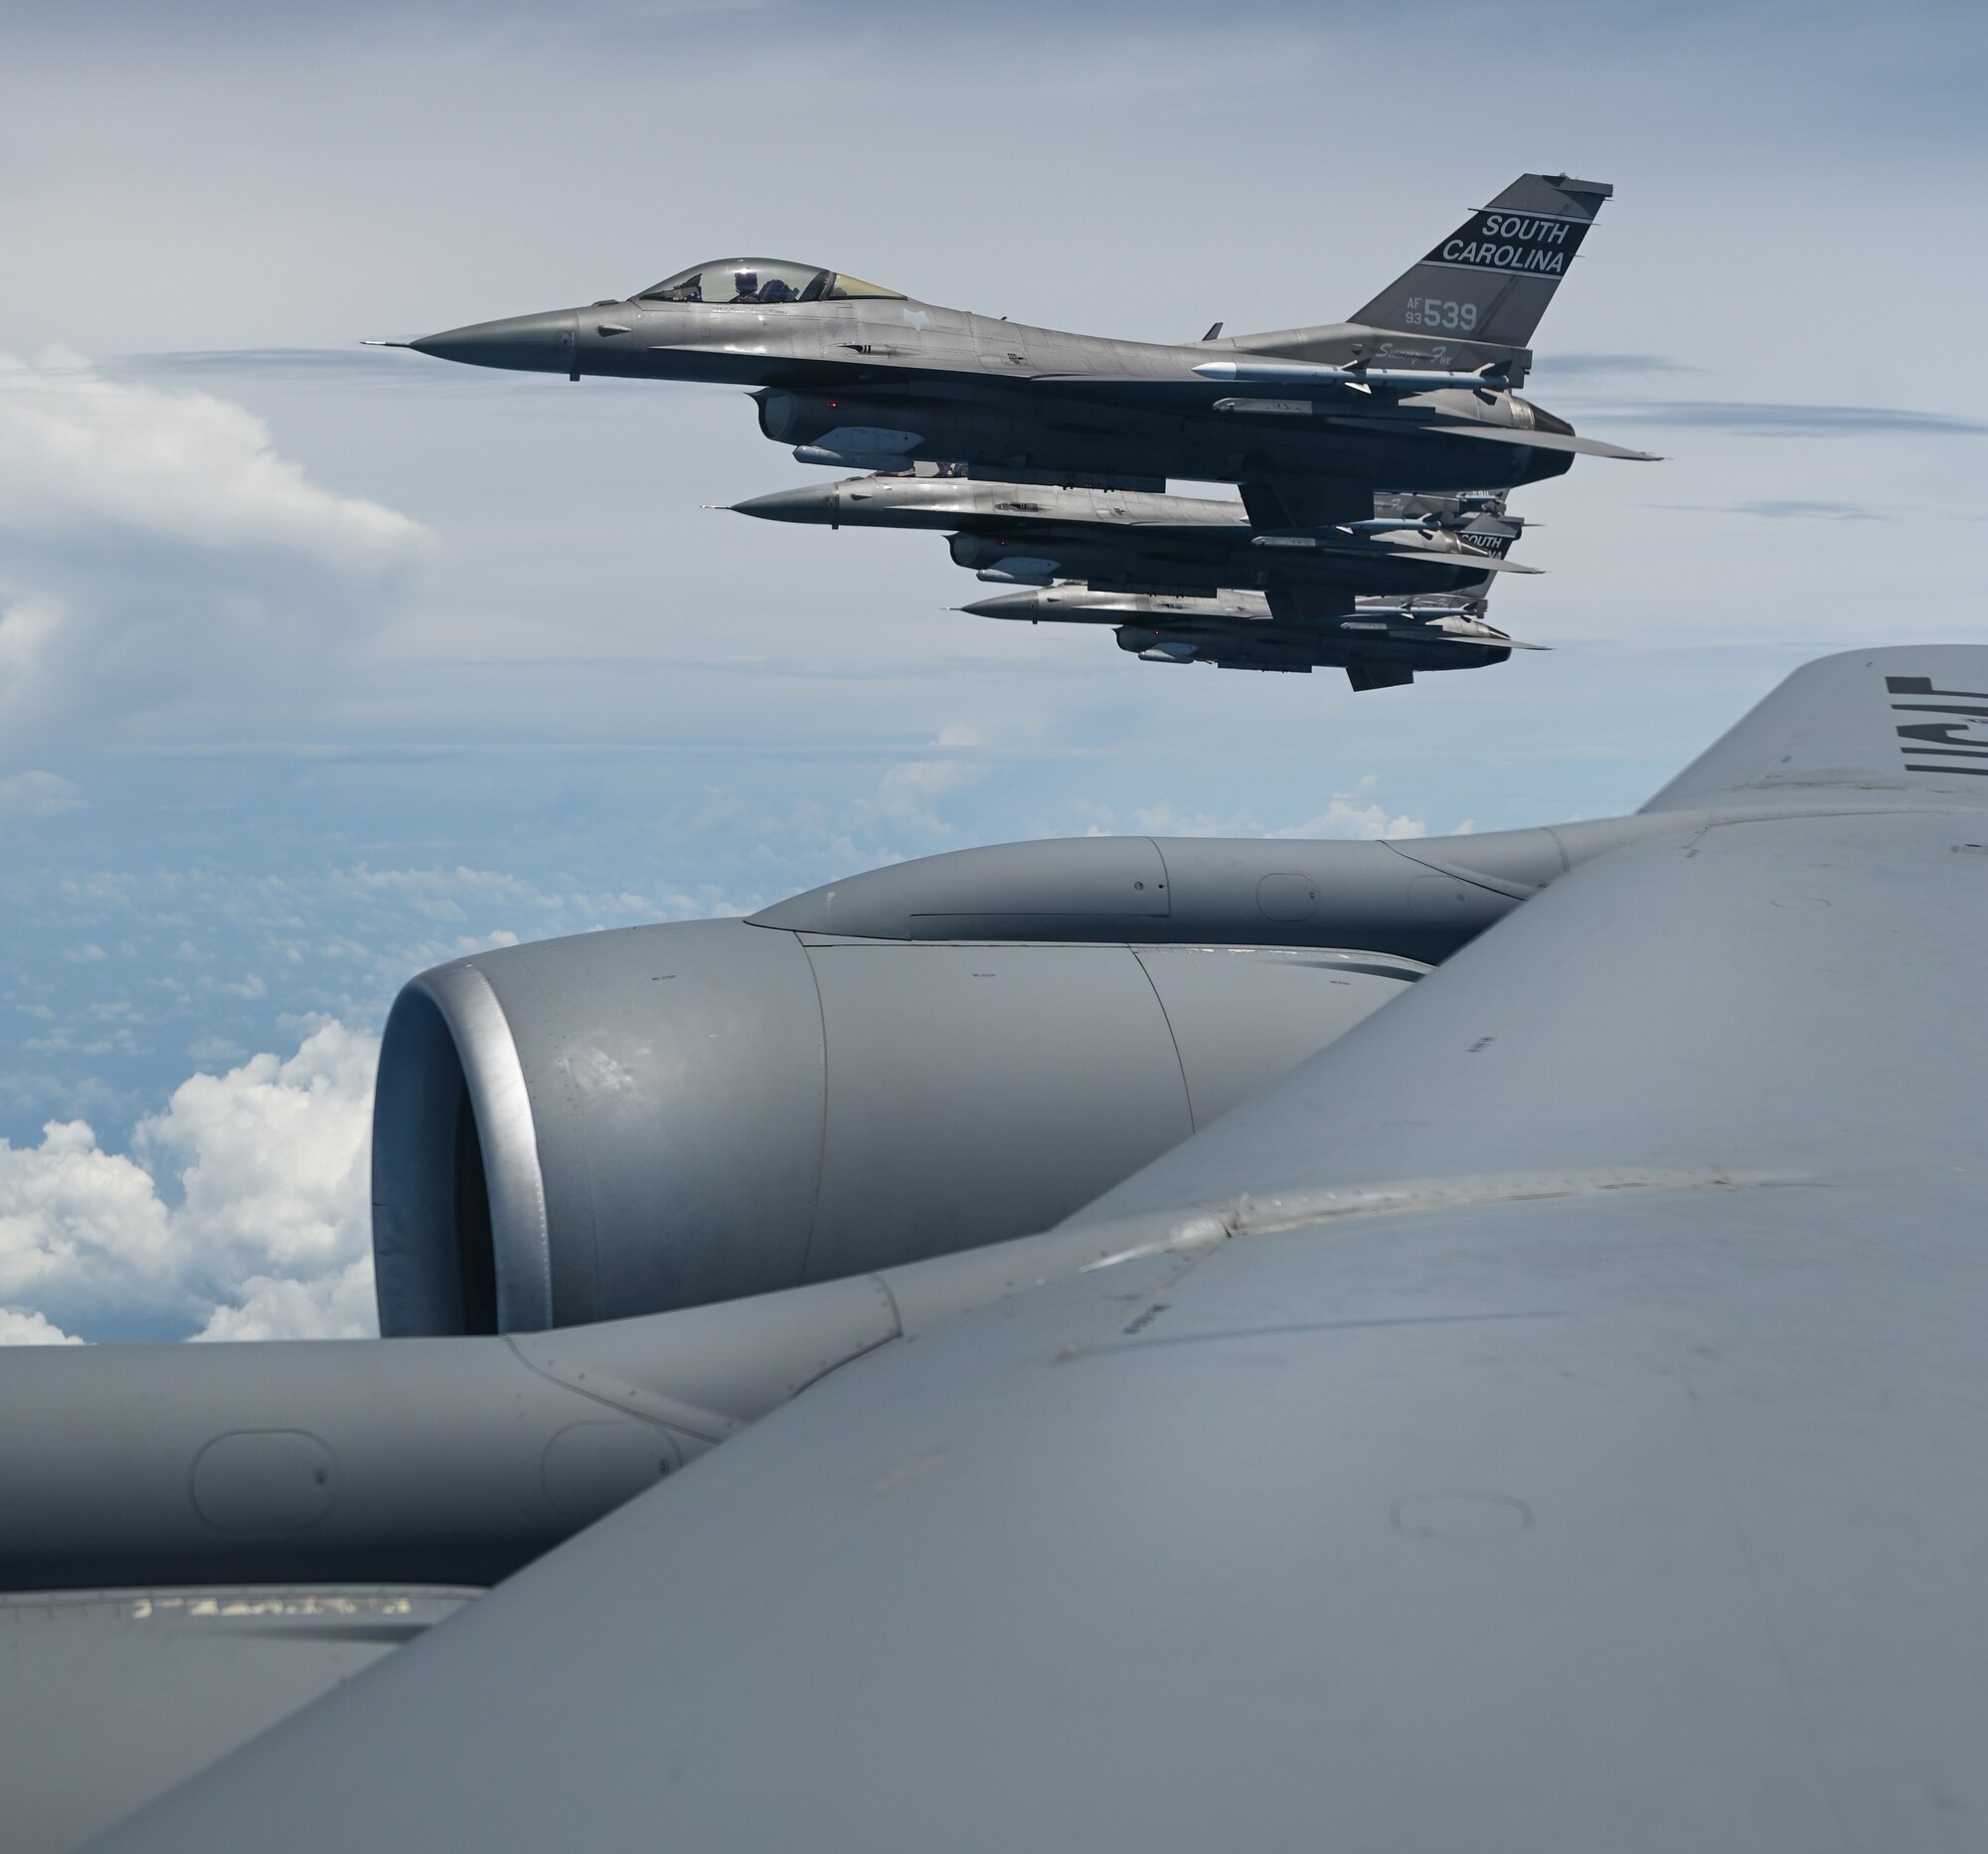 Colombian Air Force KFIRs and the U.S. Air Force F-16 Fighting Falcons from the South Carolina Air National Guard, 157th Fighter Squadron, fly in formation during Relampago VII, an exercise in Barranquilla, Colombia, Aug. 30, 2022. South Carolina is Colombia’s partner in the State Partnership Program.